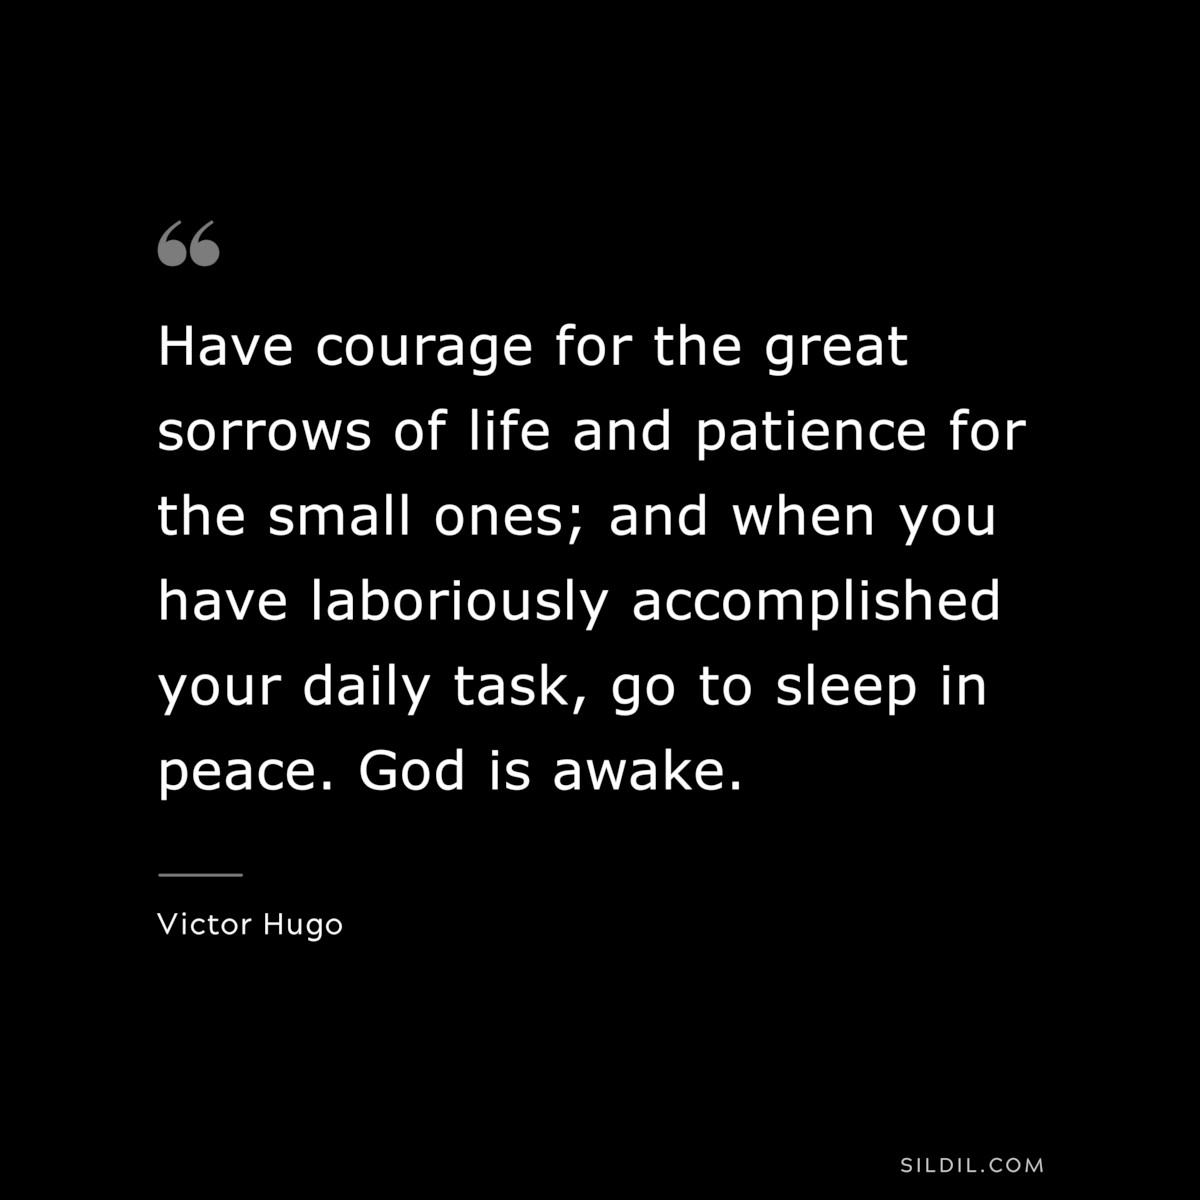 Have courage for the great sorrows of life and patience for the small ones; and when you have laboriously accomplished your daily task, go to sleep in peace. God is awake.― Victor Hugo